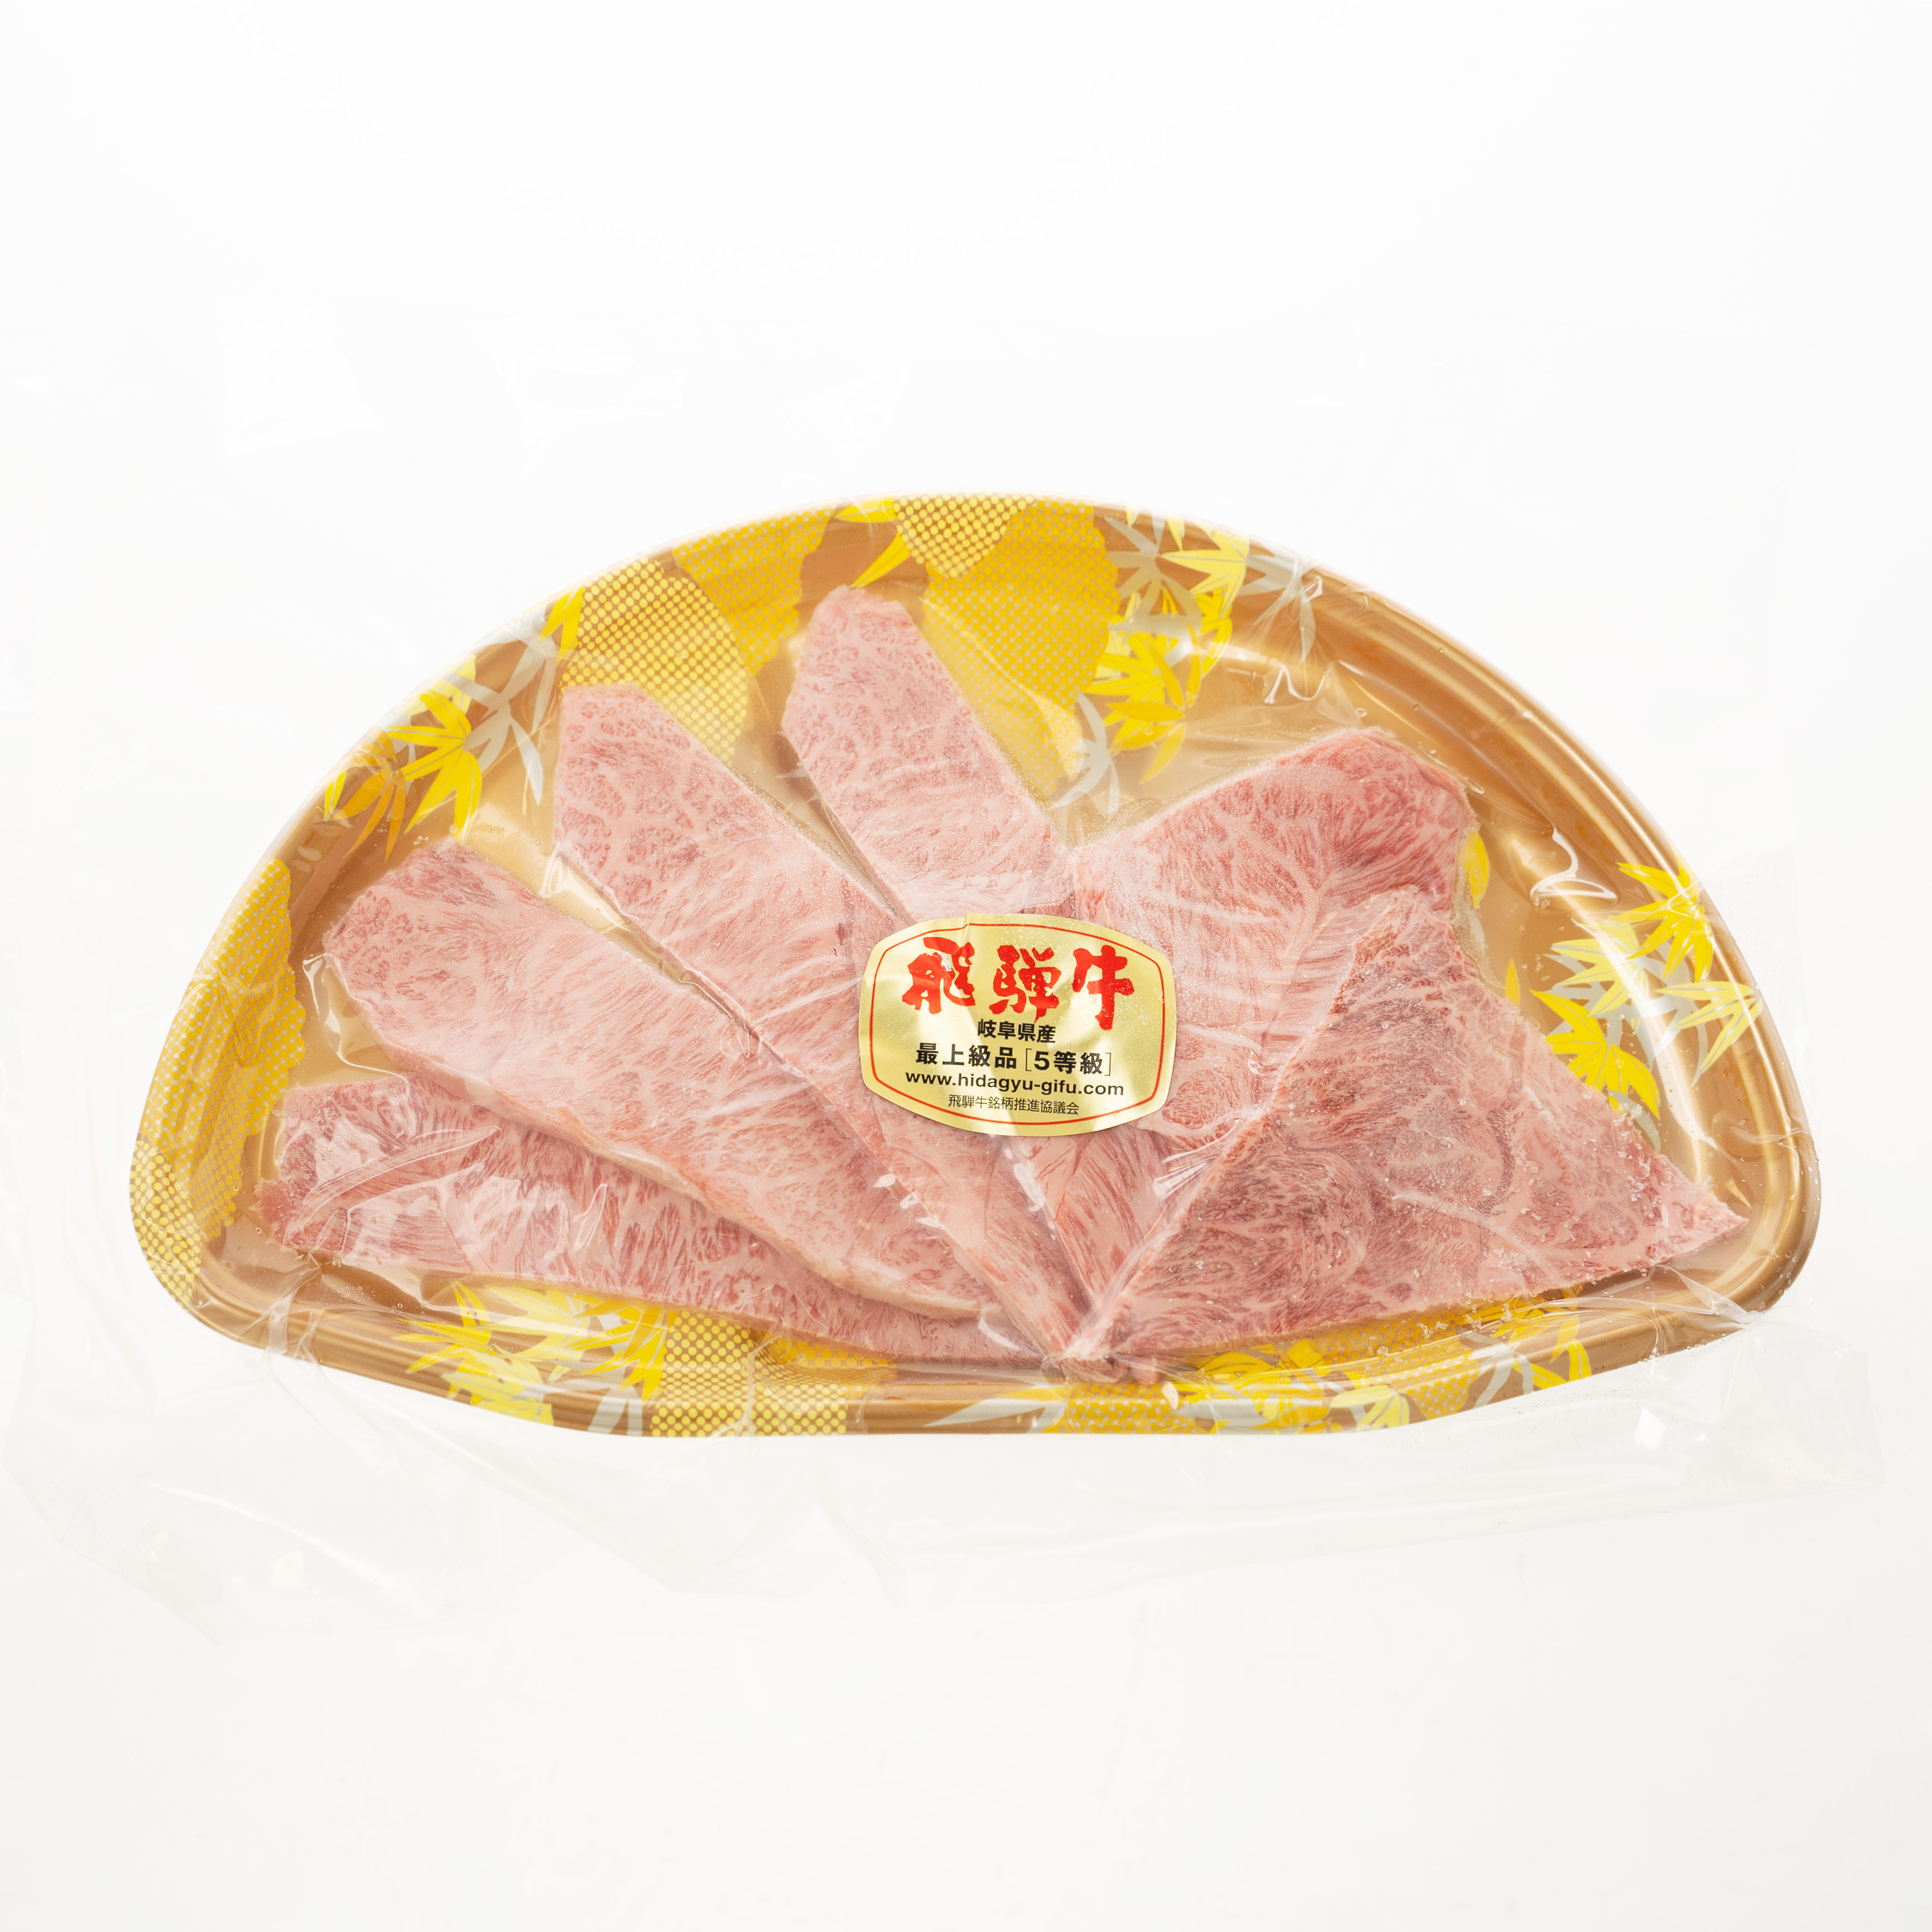 Hida Premium A5 Wagyu Beef Oyster Blade 150g-eBest-Beef,Meat deli & eggs